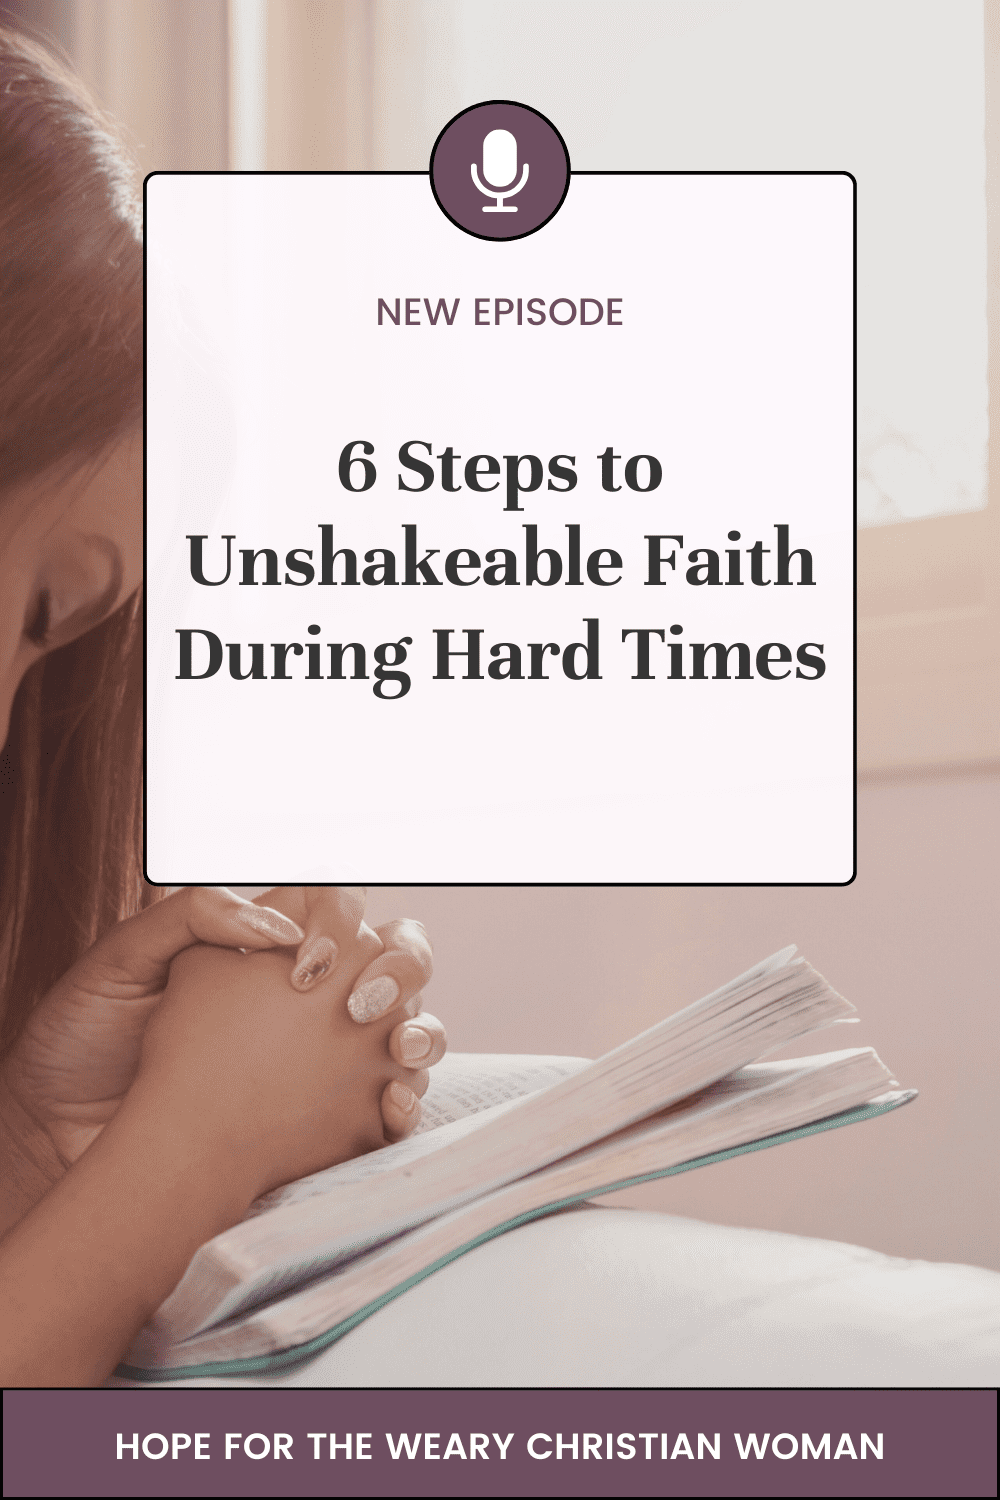 Building strong faith is key to learning to trust God during hard times but it's also not always easy. When lifet gets tough it's important to grow closer to God as you wait on his timing and plans. Listen in to learn the 6 steps of the roadmap that can help you find peace, hope and strength as you learn to endure.